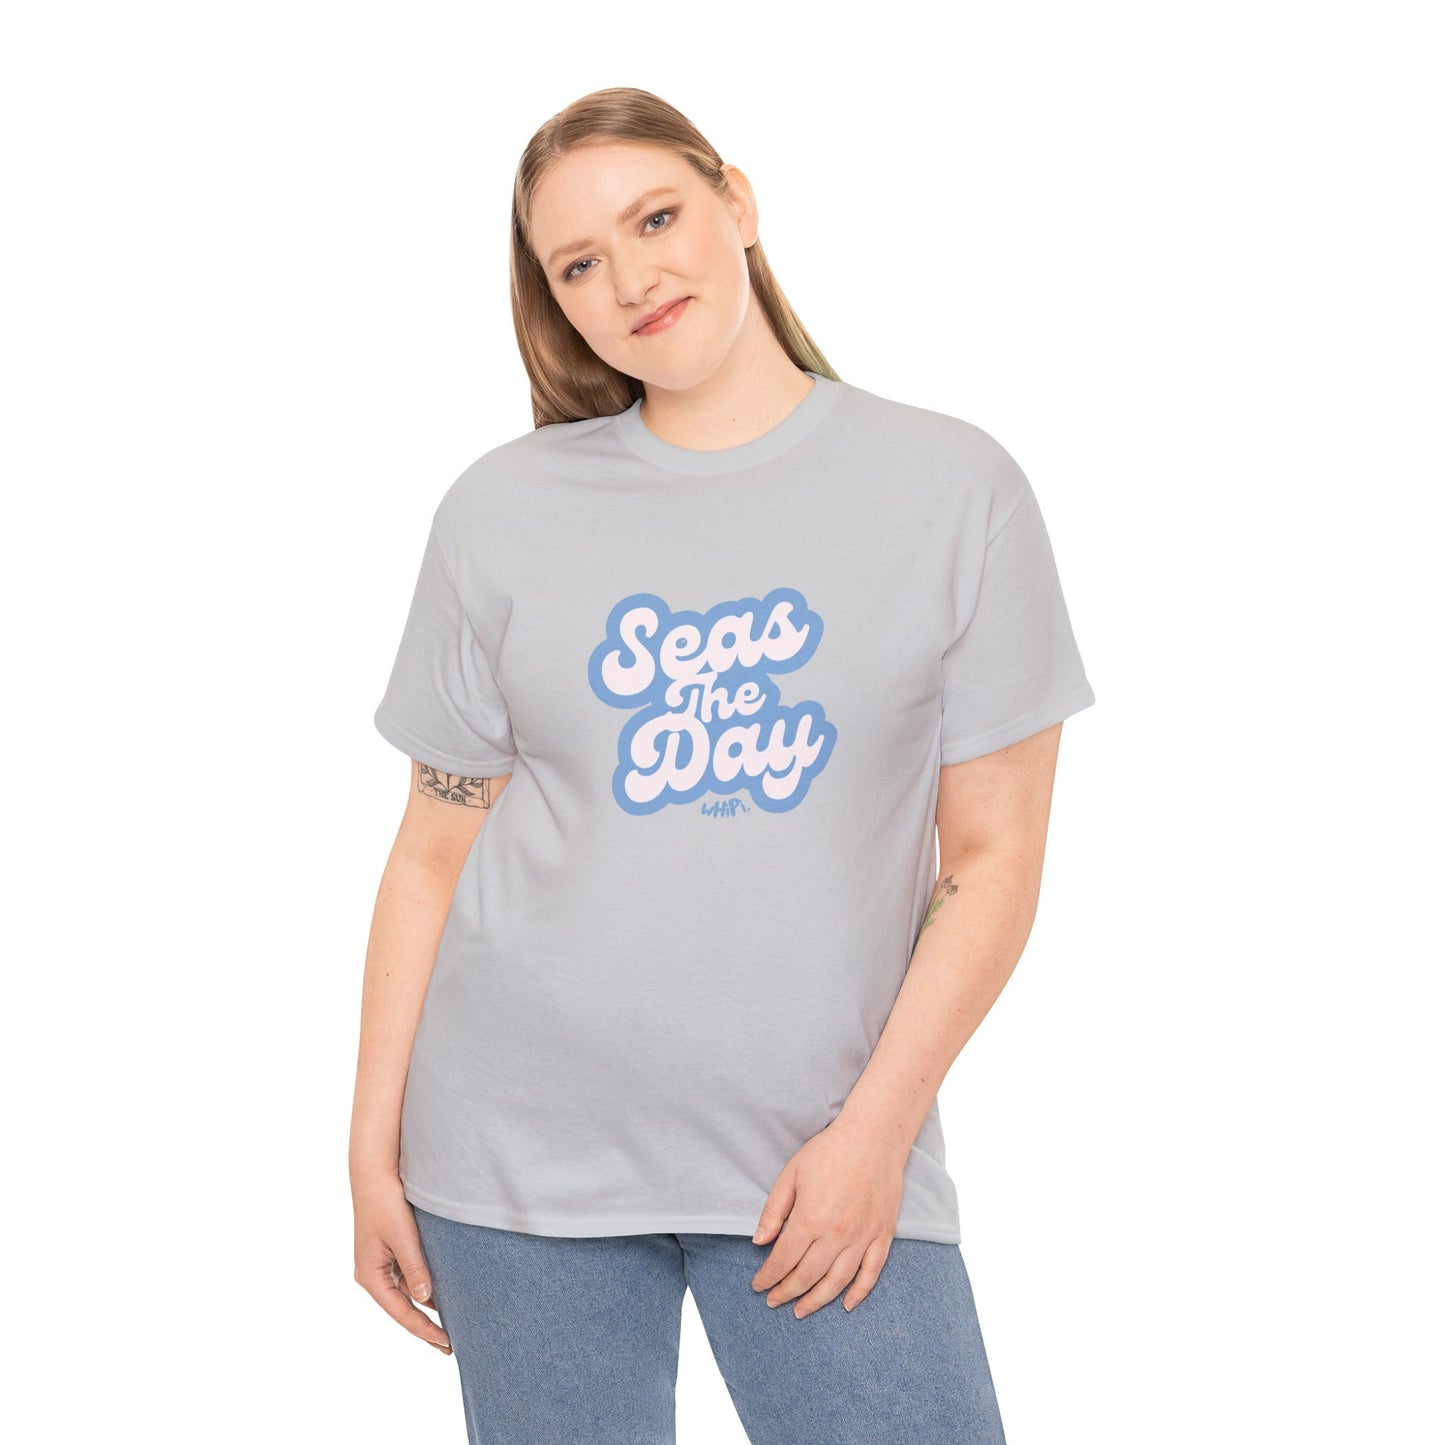 Seas The Day T-Shirt